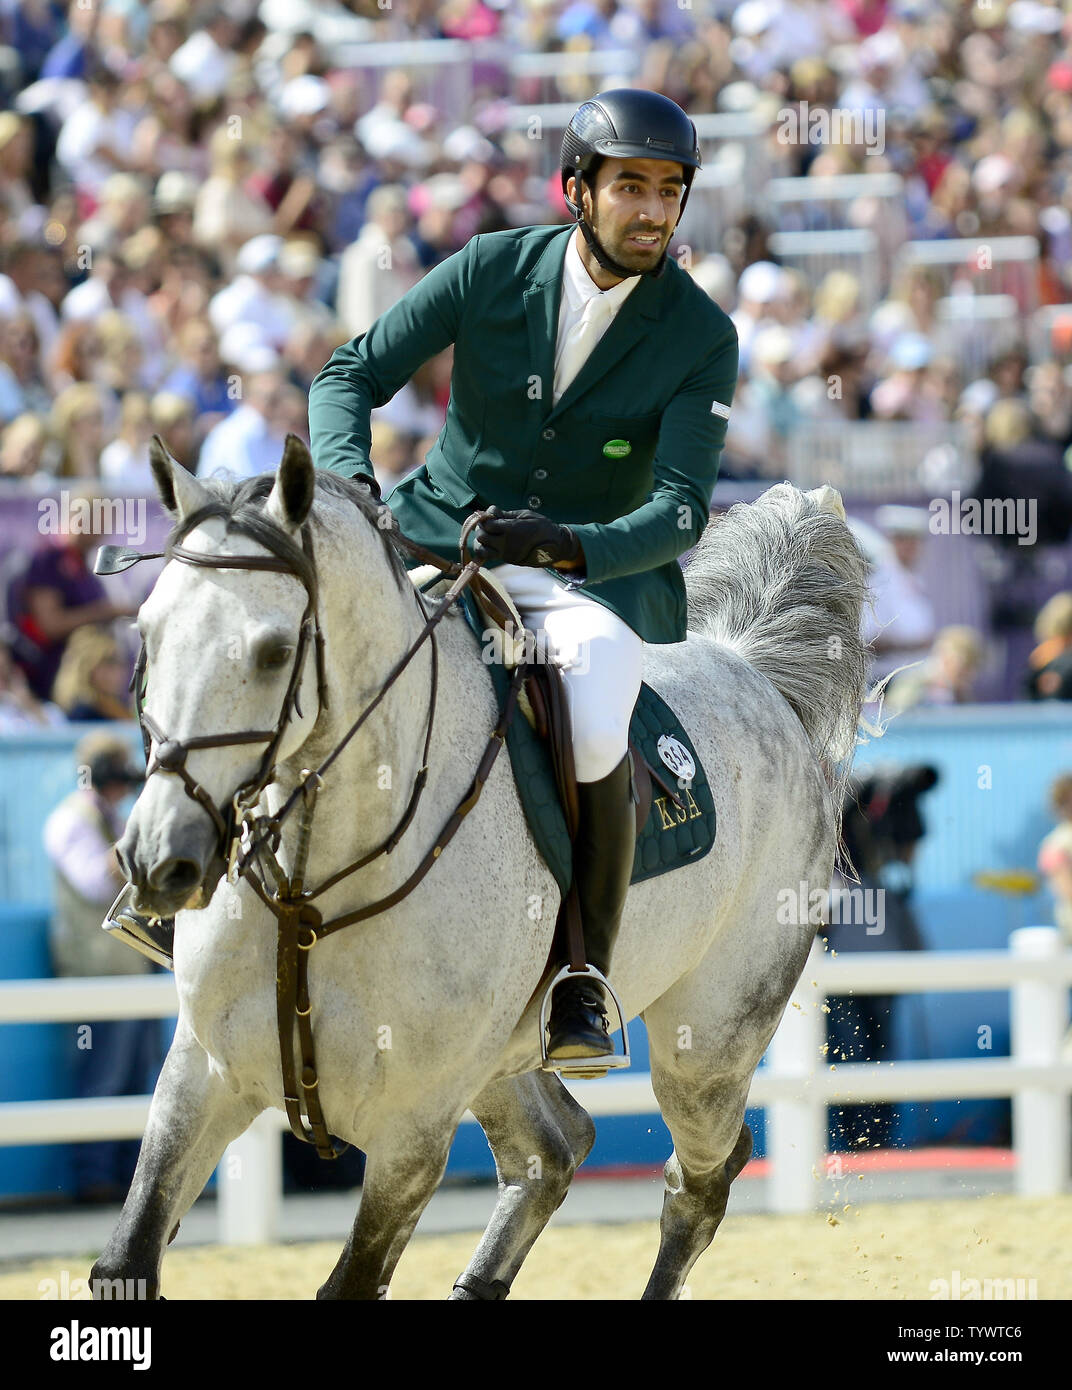 HRH Prince Abdullah Al-Saud of Saudi Arabia, riding Davos,  competes in the Equestrian the 3rd Qualifier Individual competition and round 2 of the Team Jumping competition at the London 2012 Summer Olympics on August 5, 2012 in London. The Saudi team finished third to capture the Bronze Medal.   UPI/Ron Sachs Stock Photo